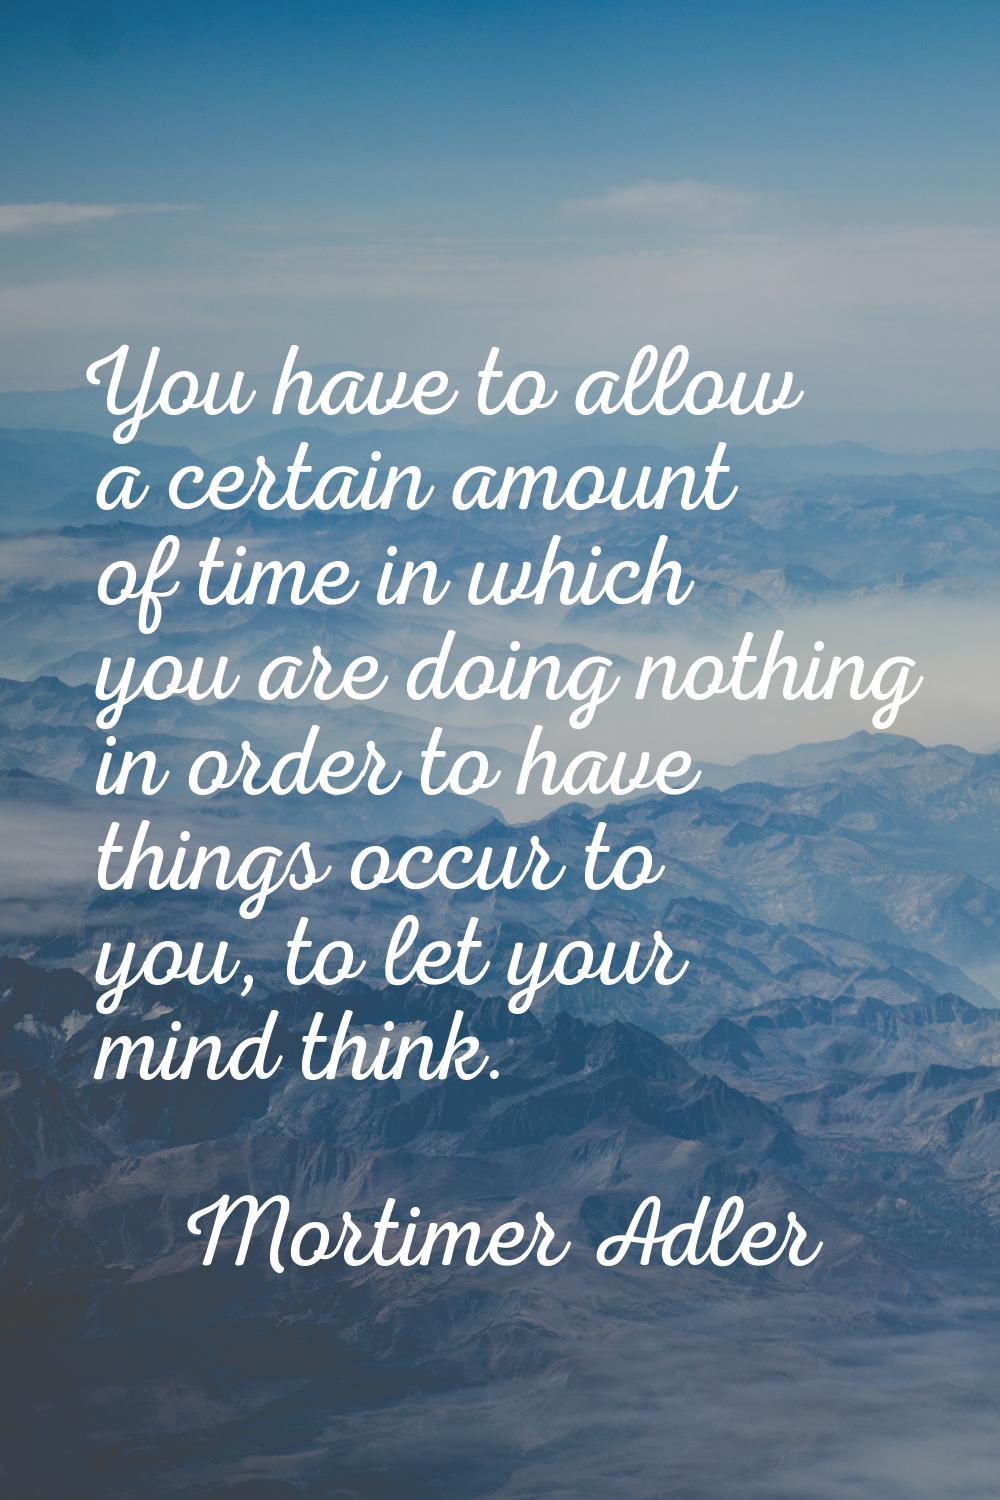 You have to allow a certain amount of time in which you are doing nothing in order to have things o